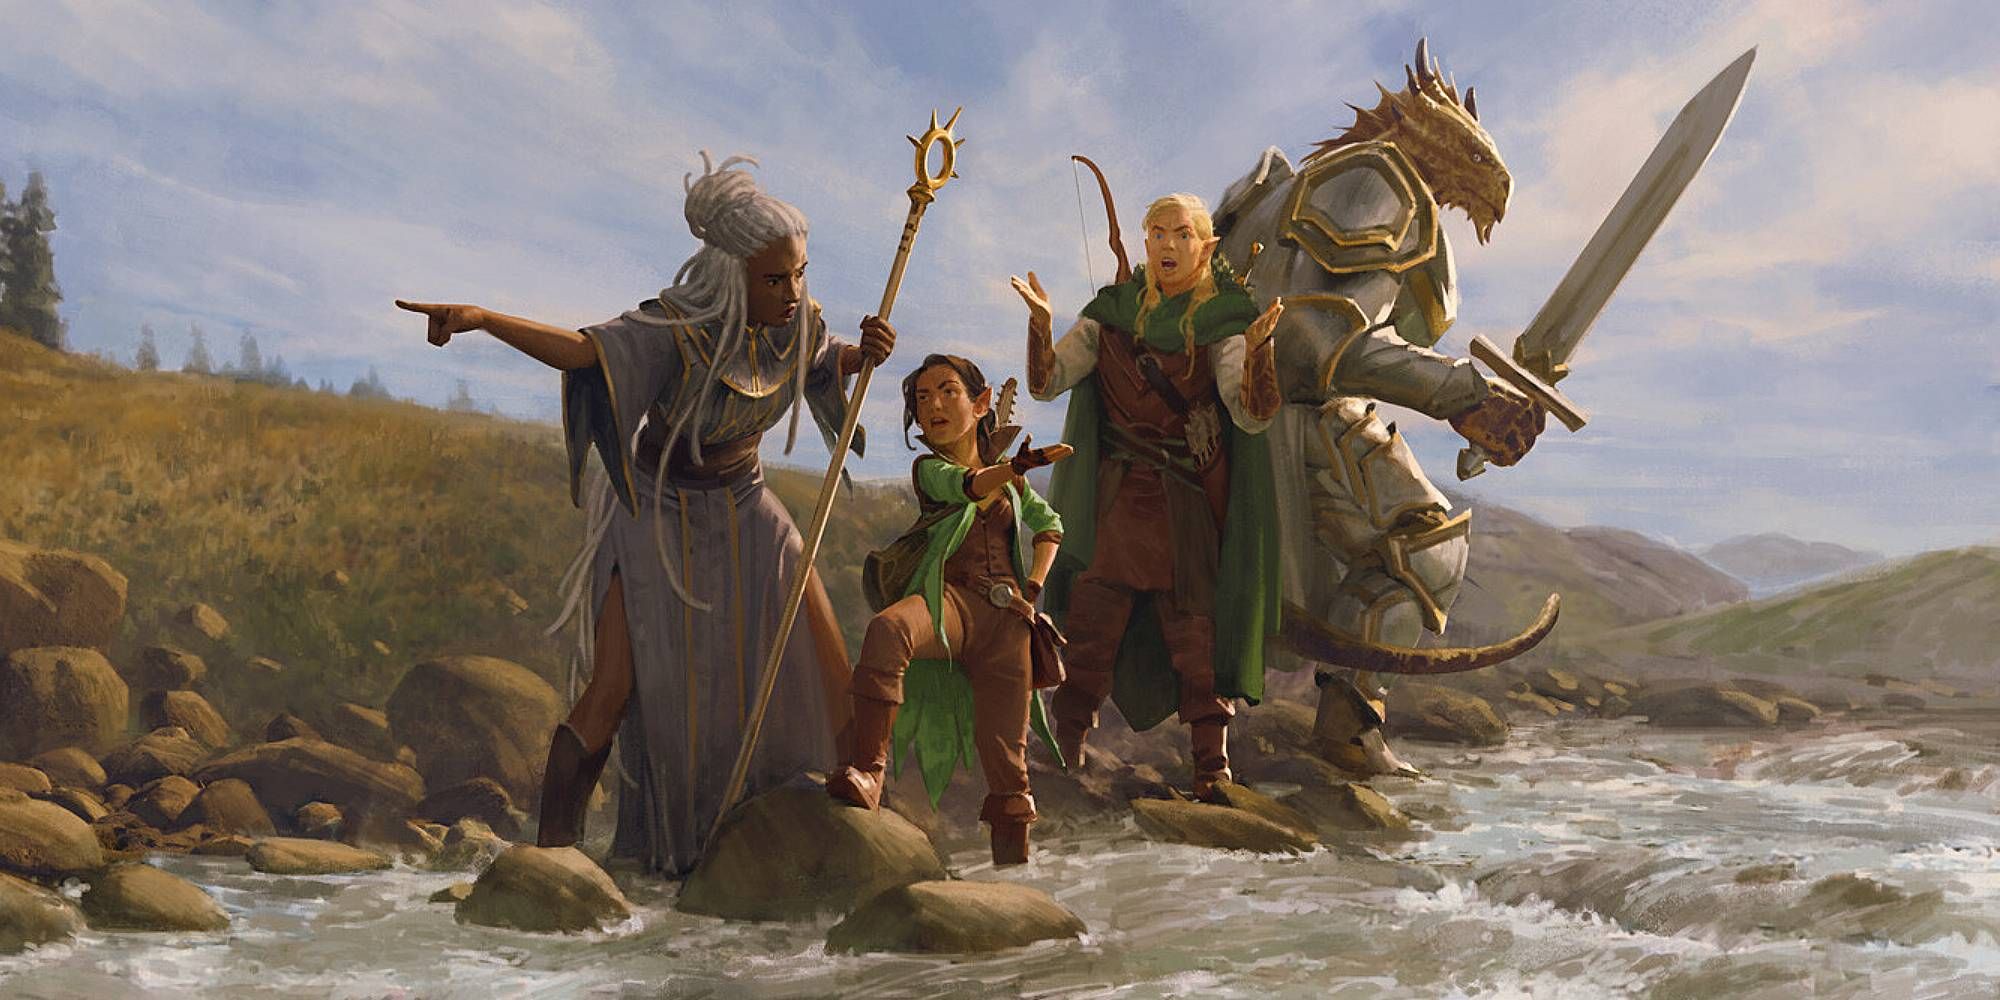 Four humanoid figures, a dark skinned woman with a staff, a short dark haired woman, a blonde elf and a large Dragonborn point in directions at a river